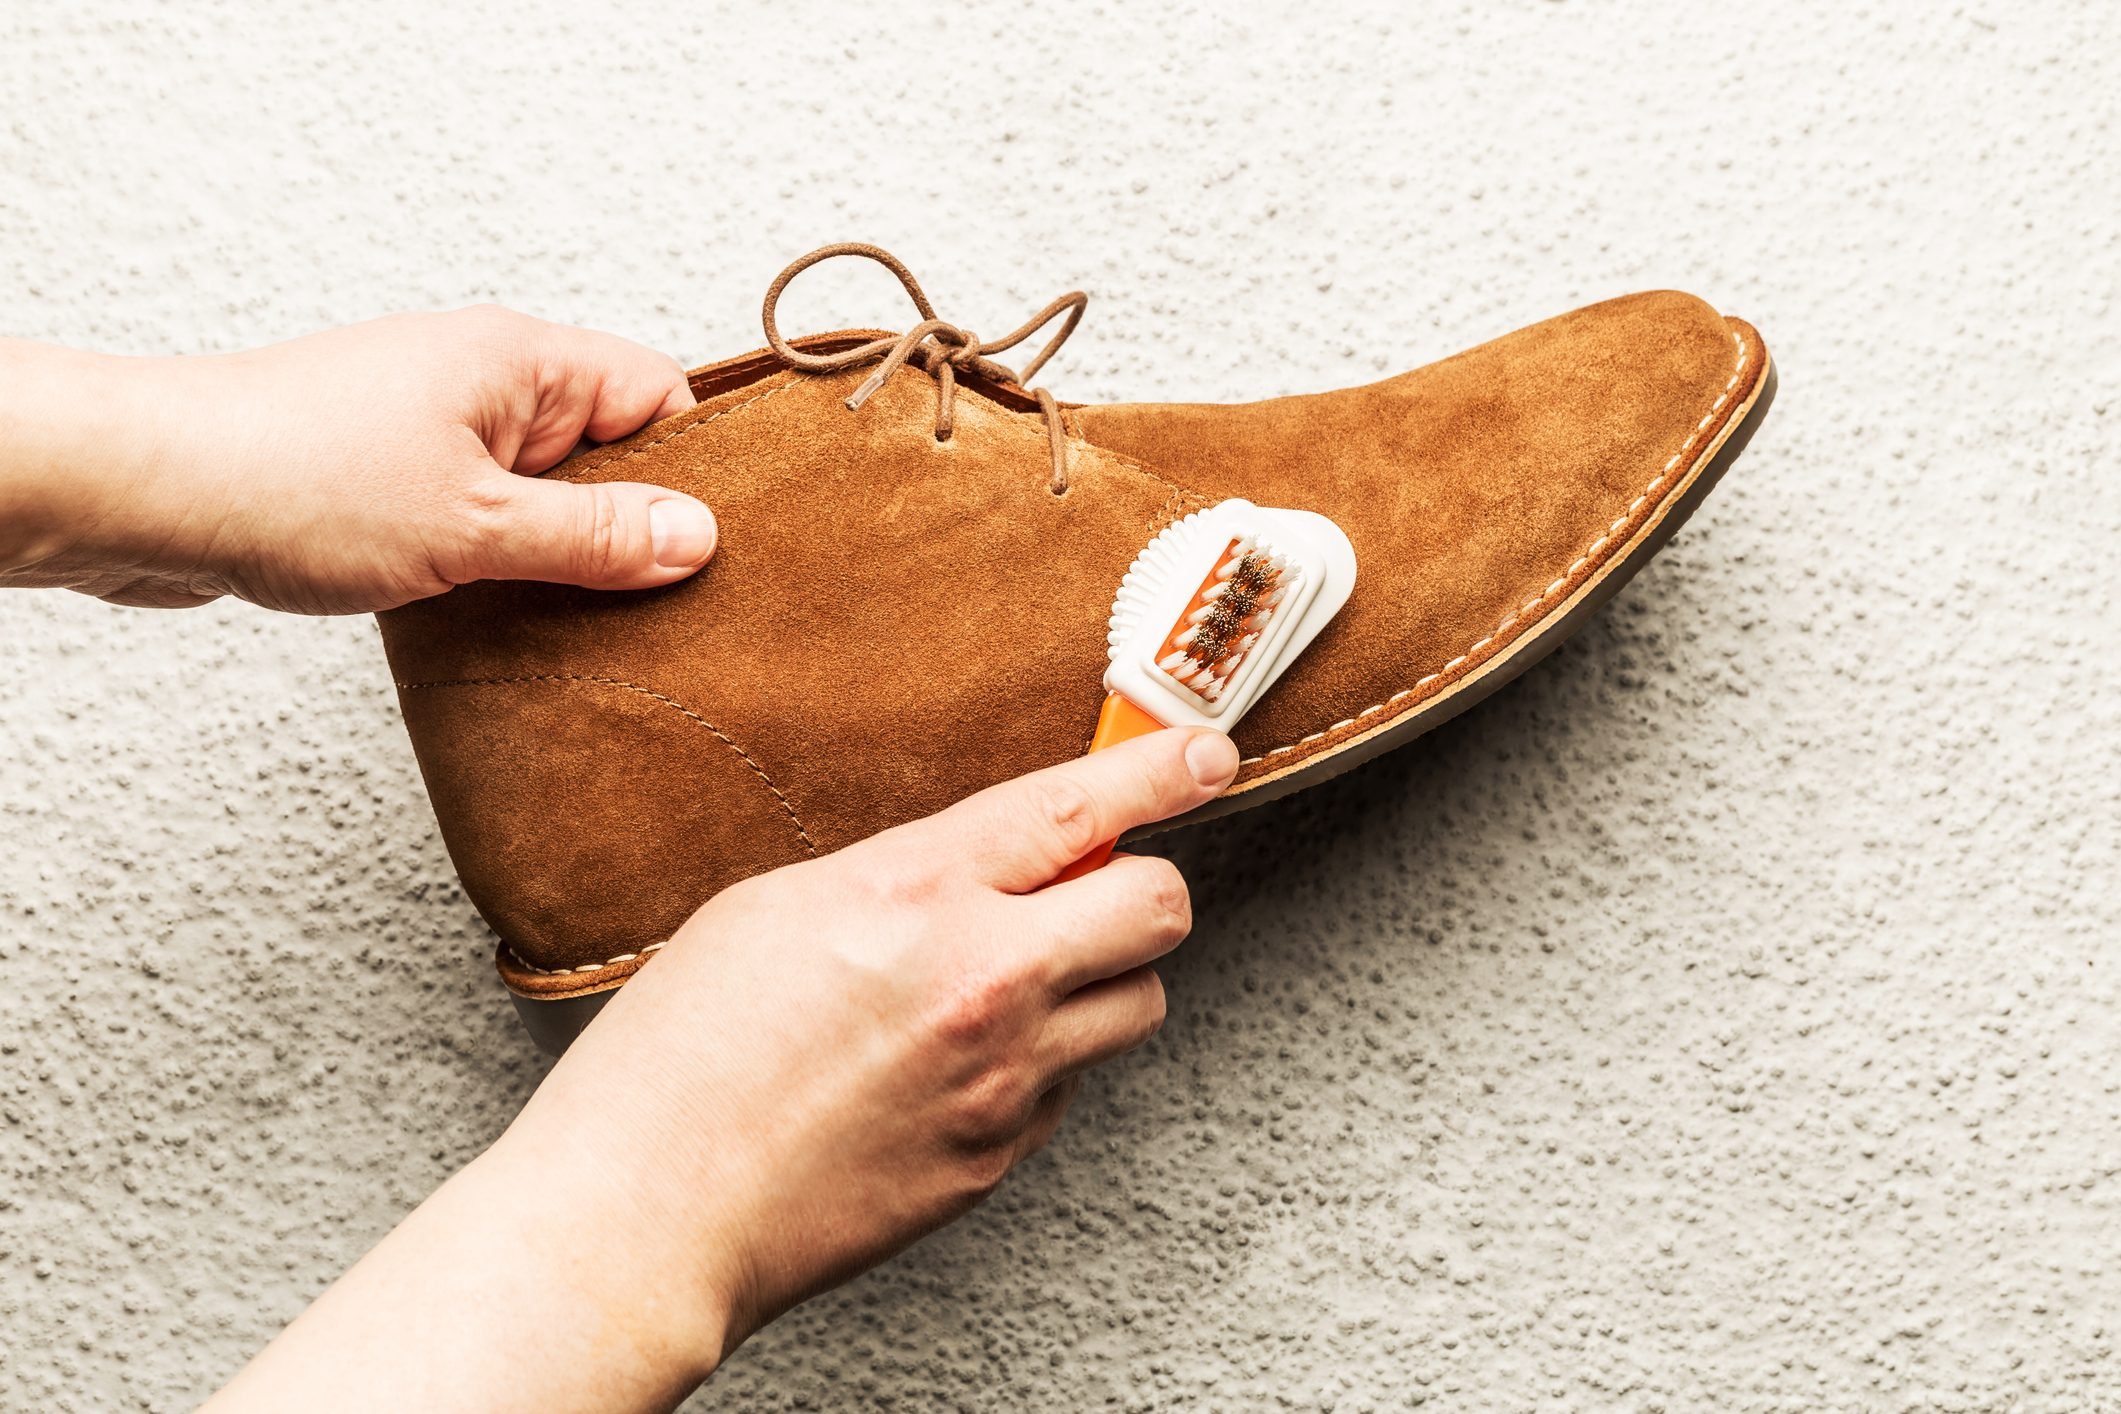 How to clean suede shoes